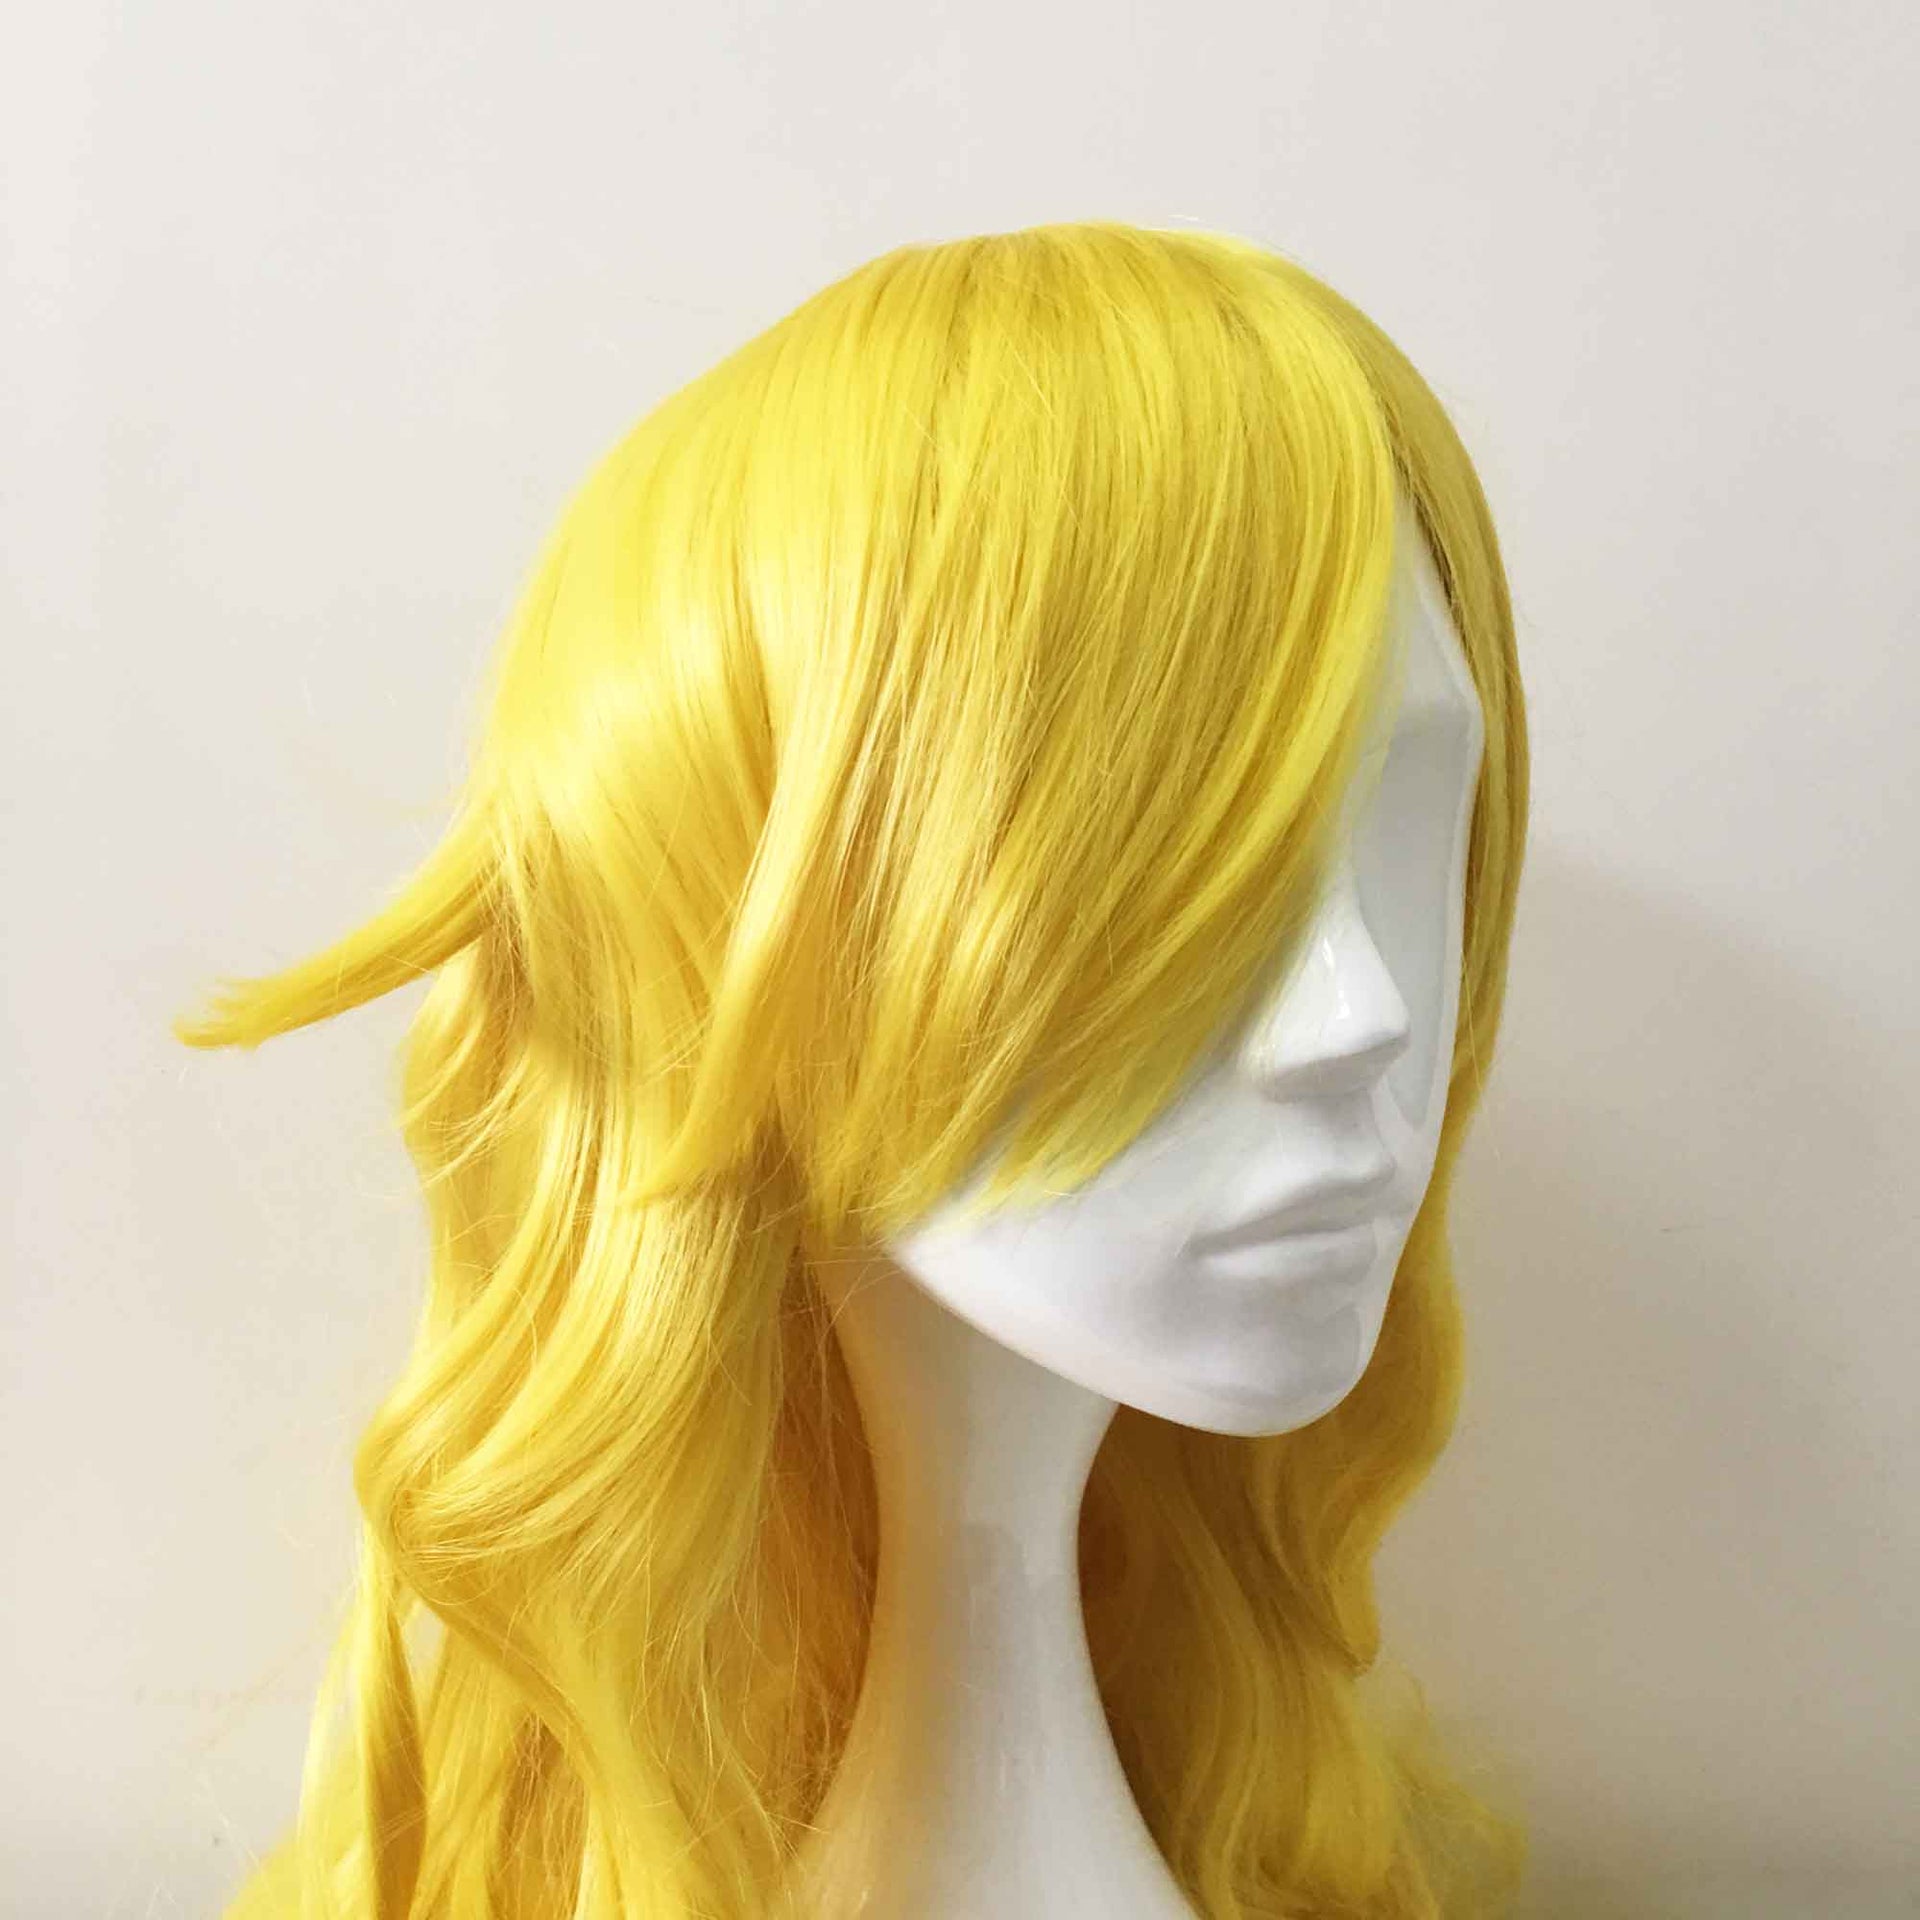 nevermindyrhead Women Yellow Long Curly Side Swept Bangs Cosplay Wig